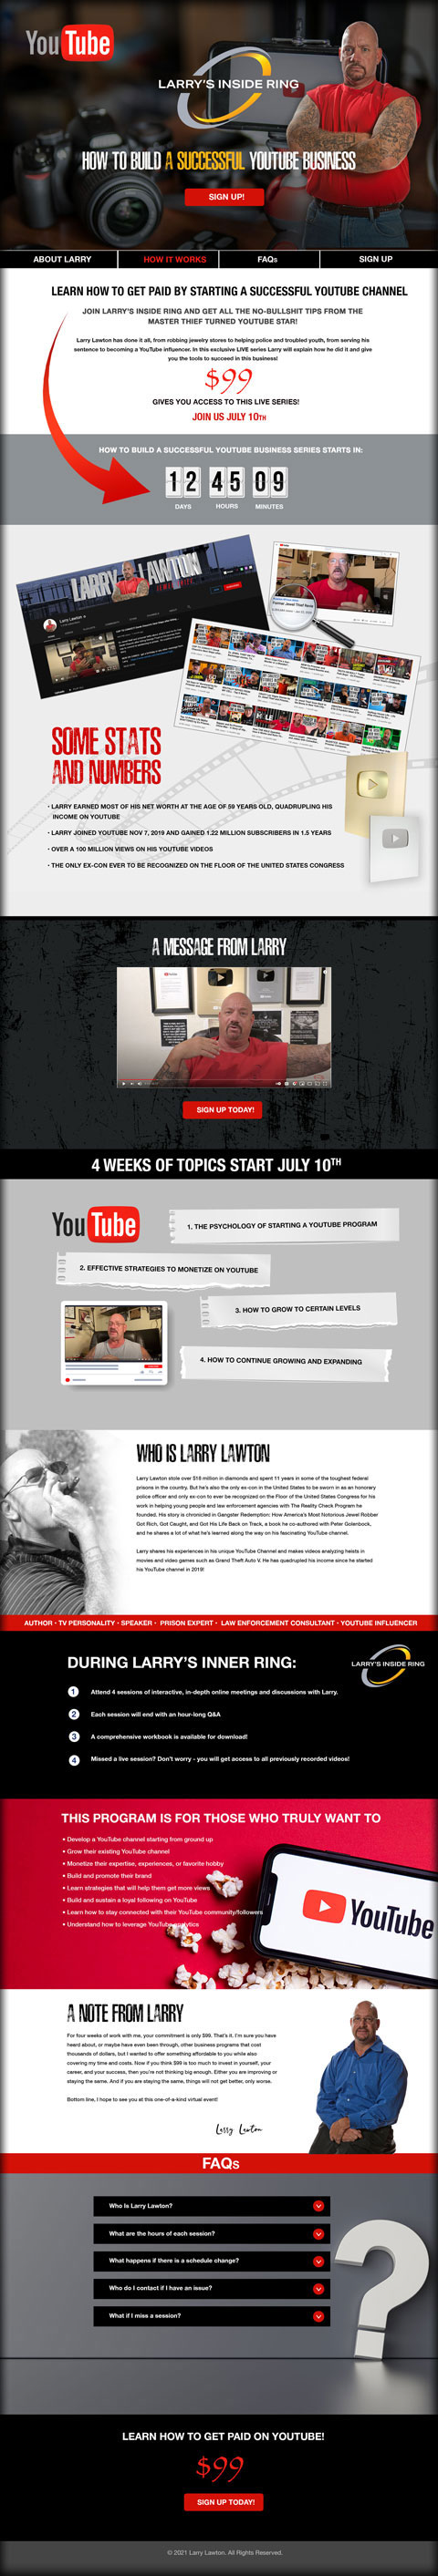 Landing Page Design, Landing Page Development, Product Page Design, Speaker Page, Subject Matter Expert, Youtuber, Youtube Star